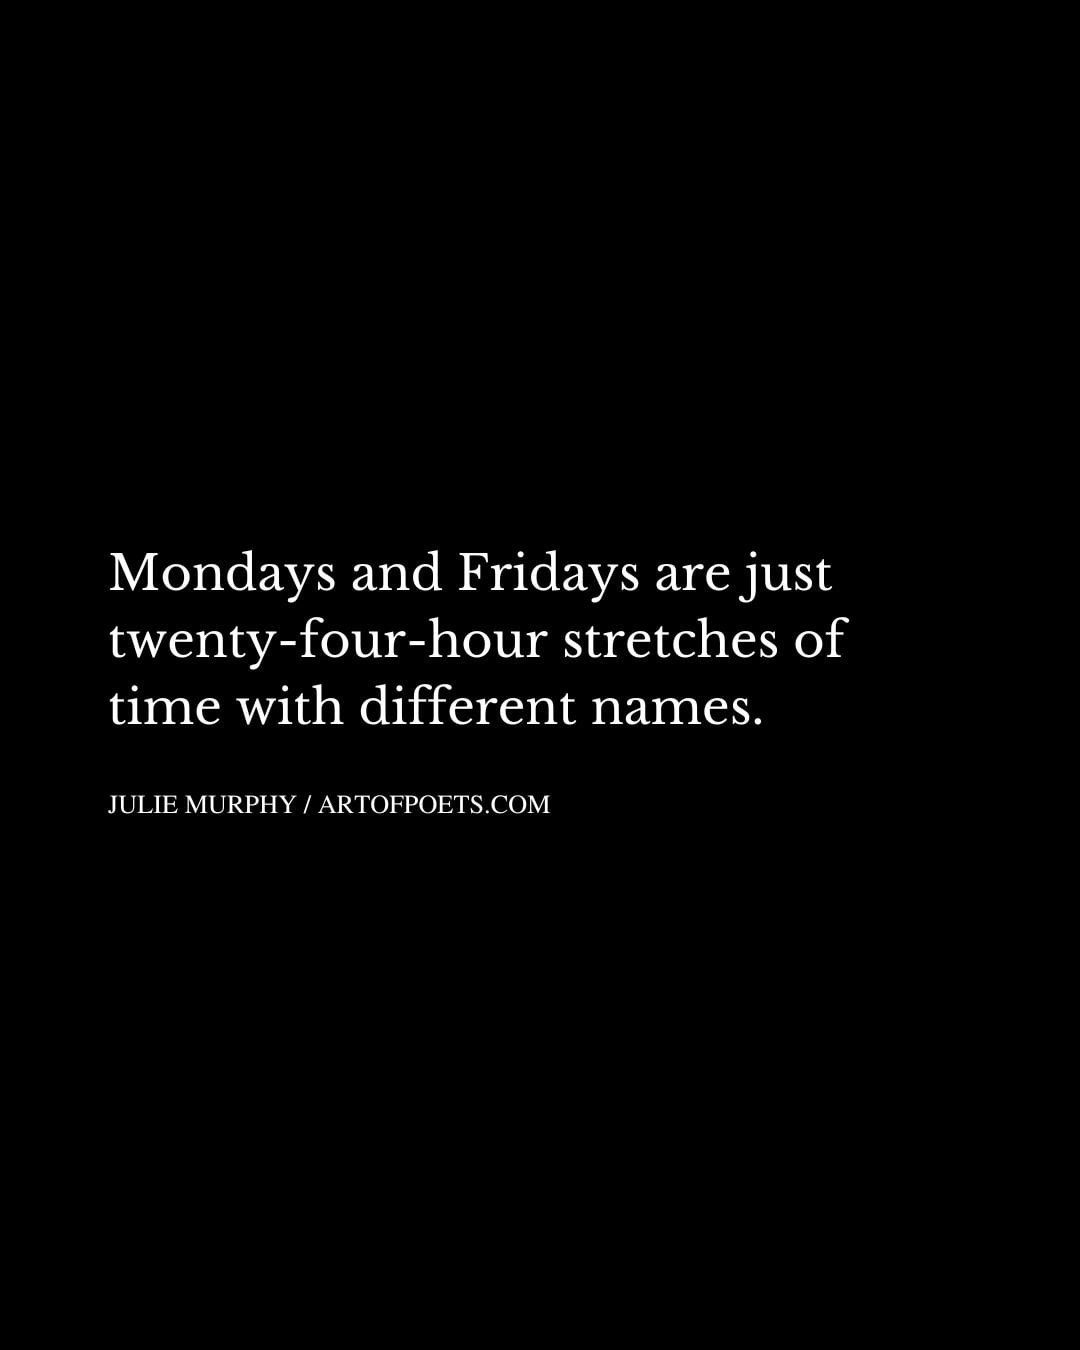 Mondays and Fridays are just twenty four hour stretches of time with different names